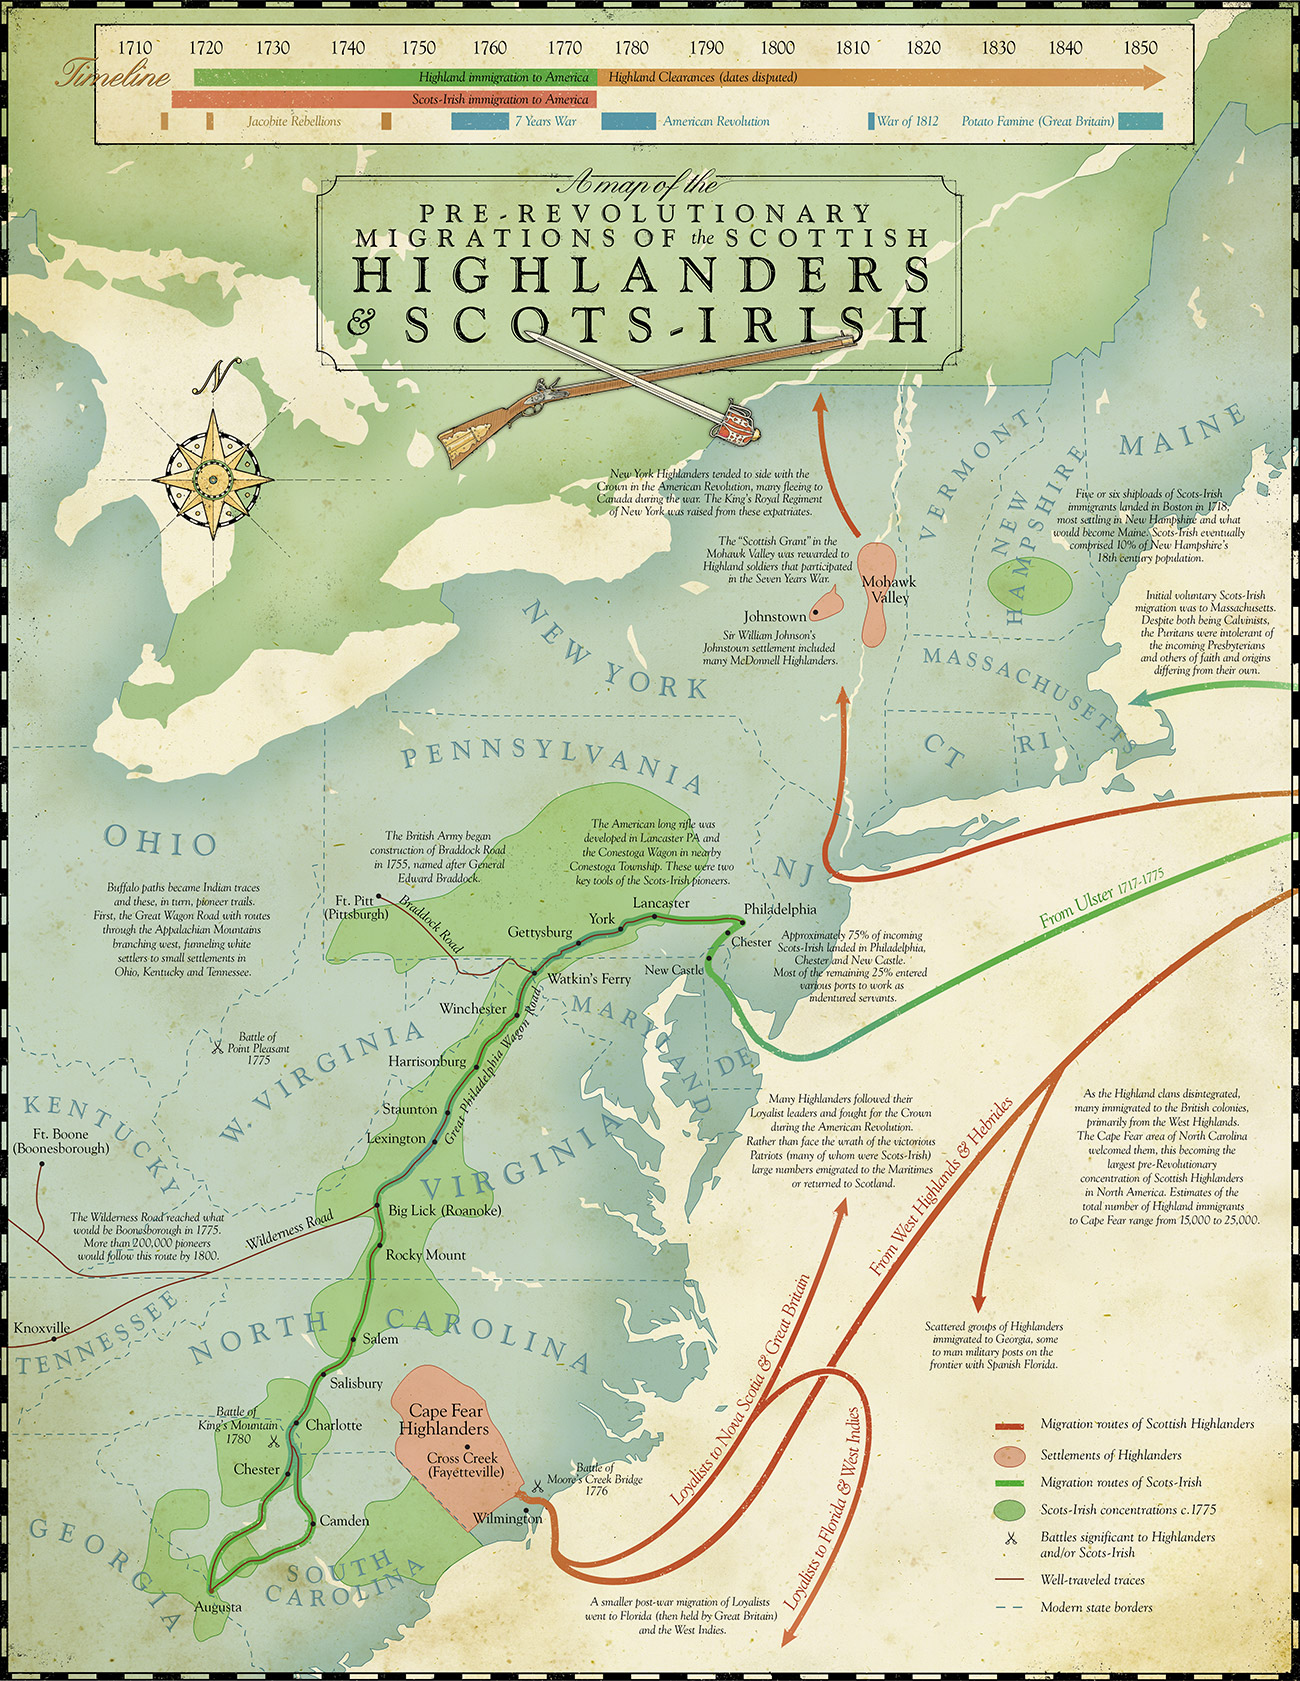 A map of Pre-Revolutionary Migrations of the Scottish Highlanders and Scots-Irish